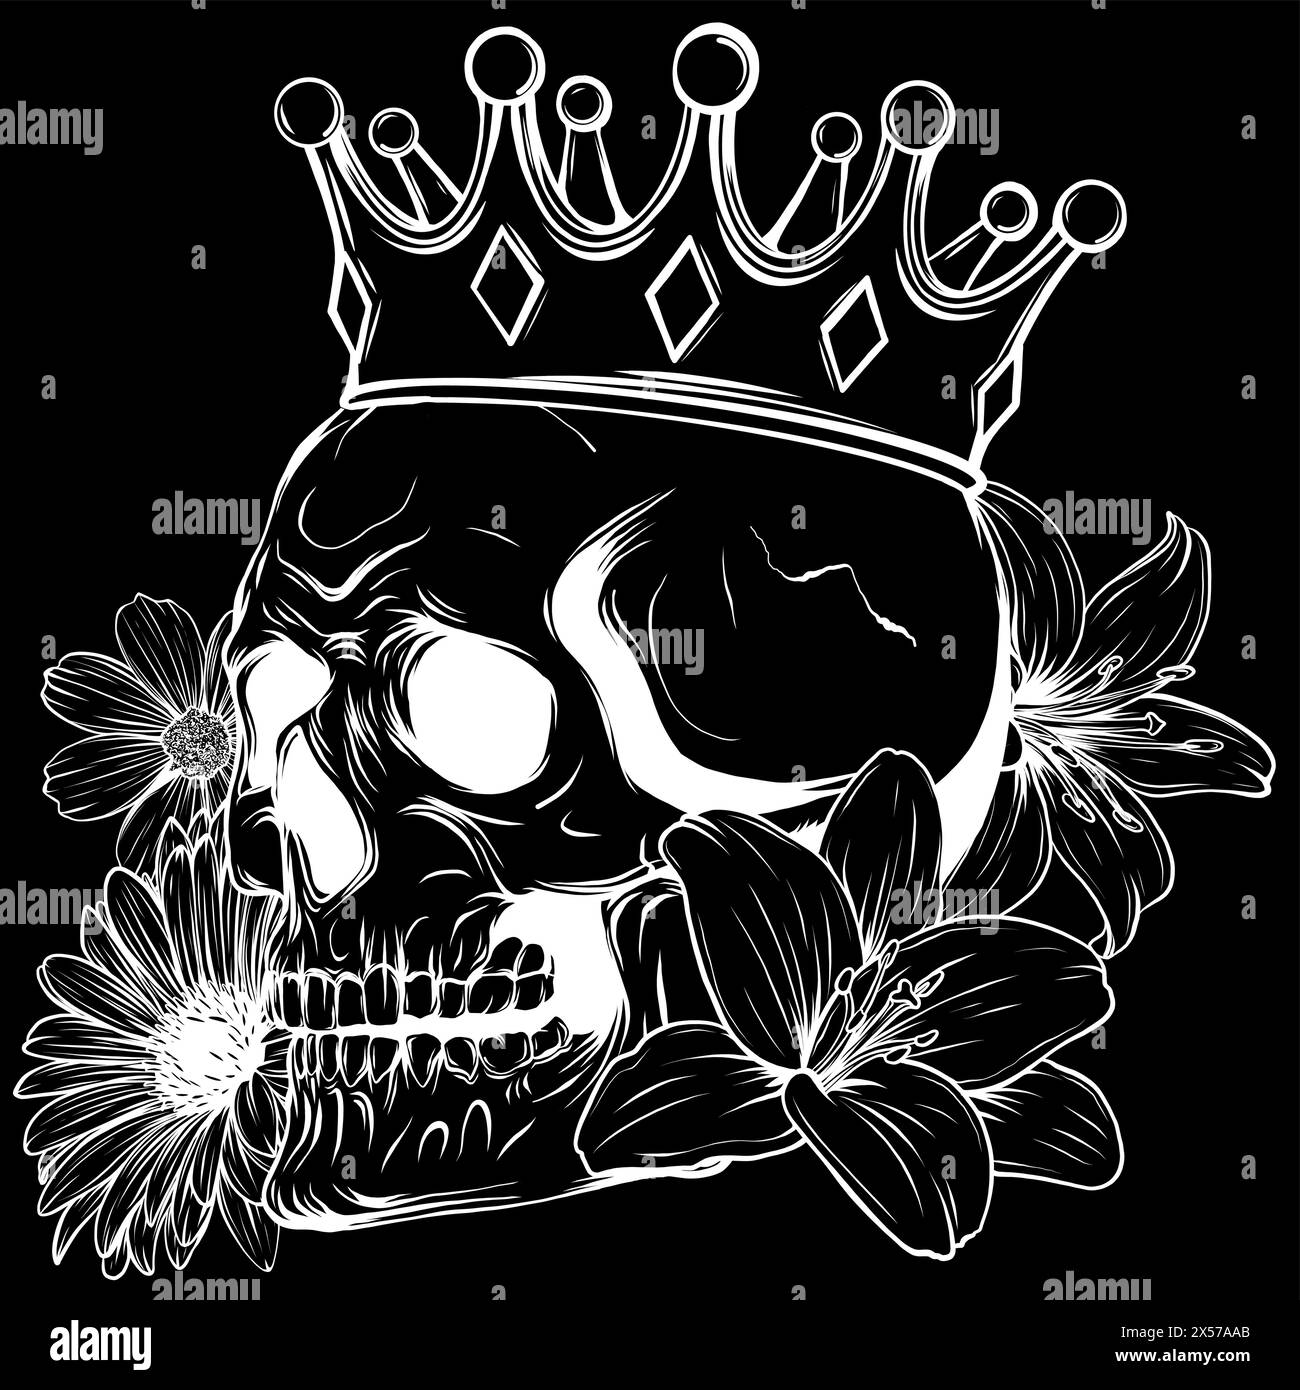 white silhouette of Beautiful romantic skull with crown and elegant wreath of flowers on black background Stock Vector